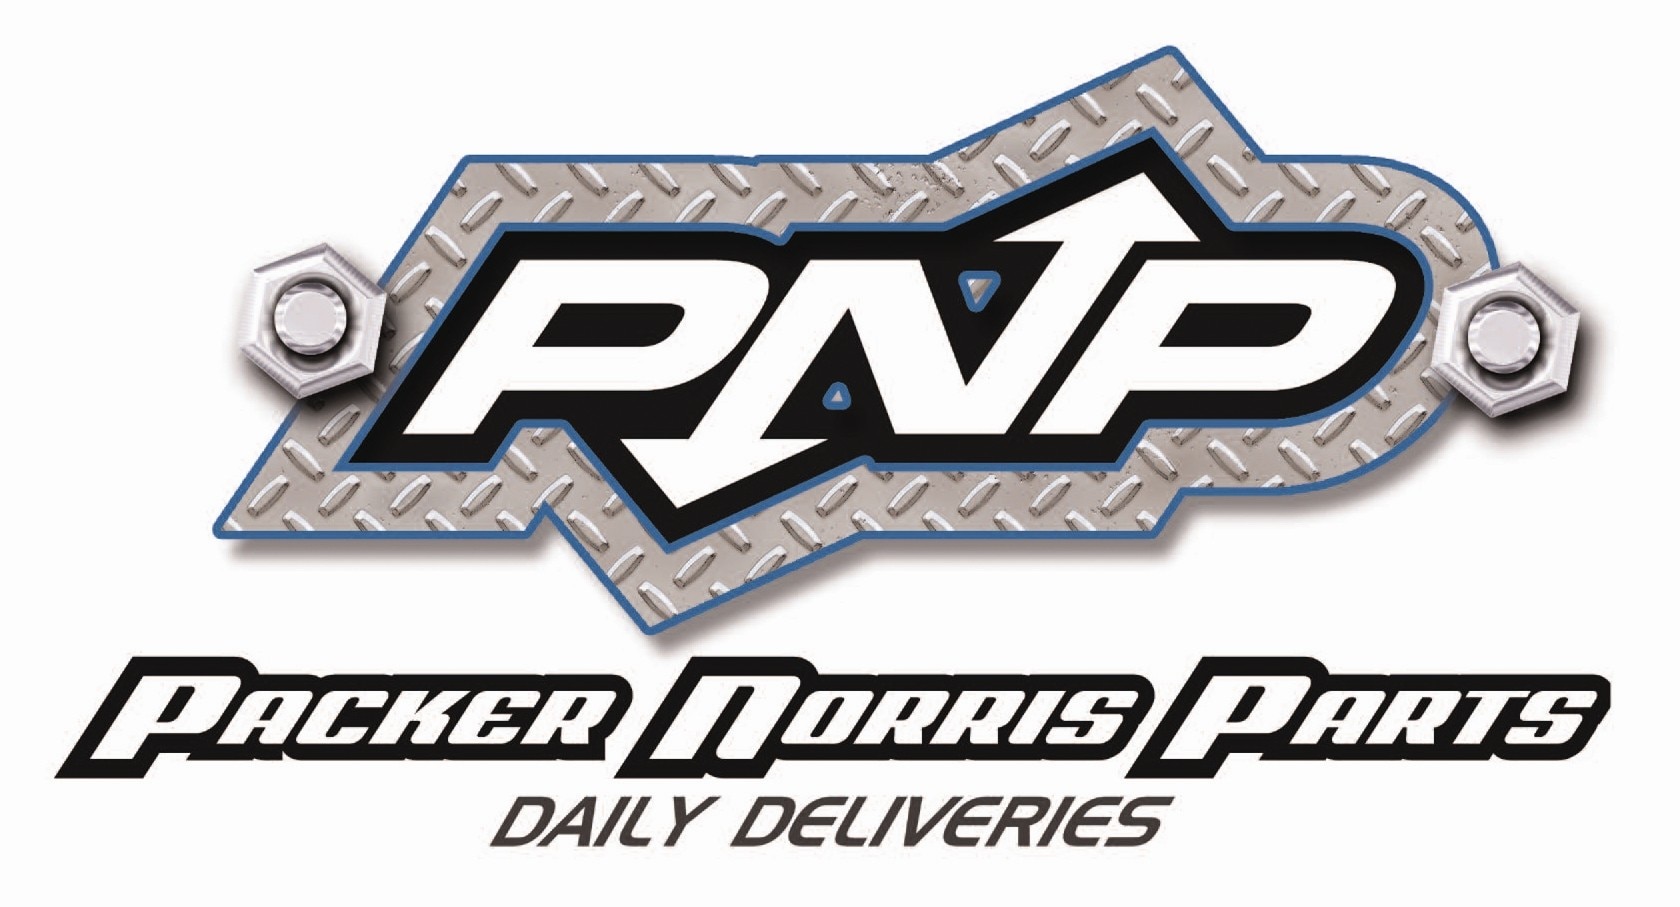 Al packer norris ford parts #7